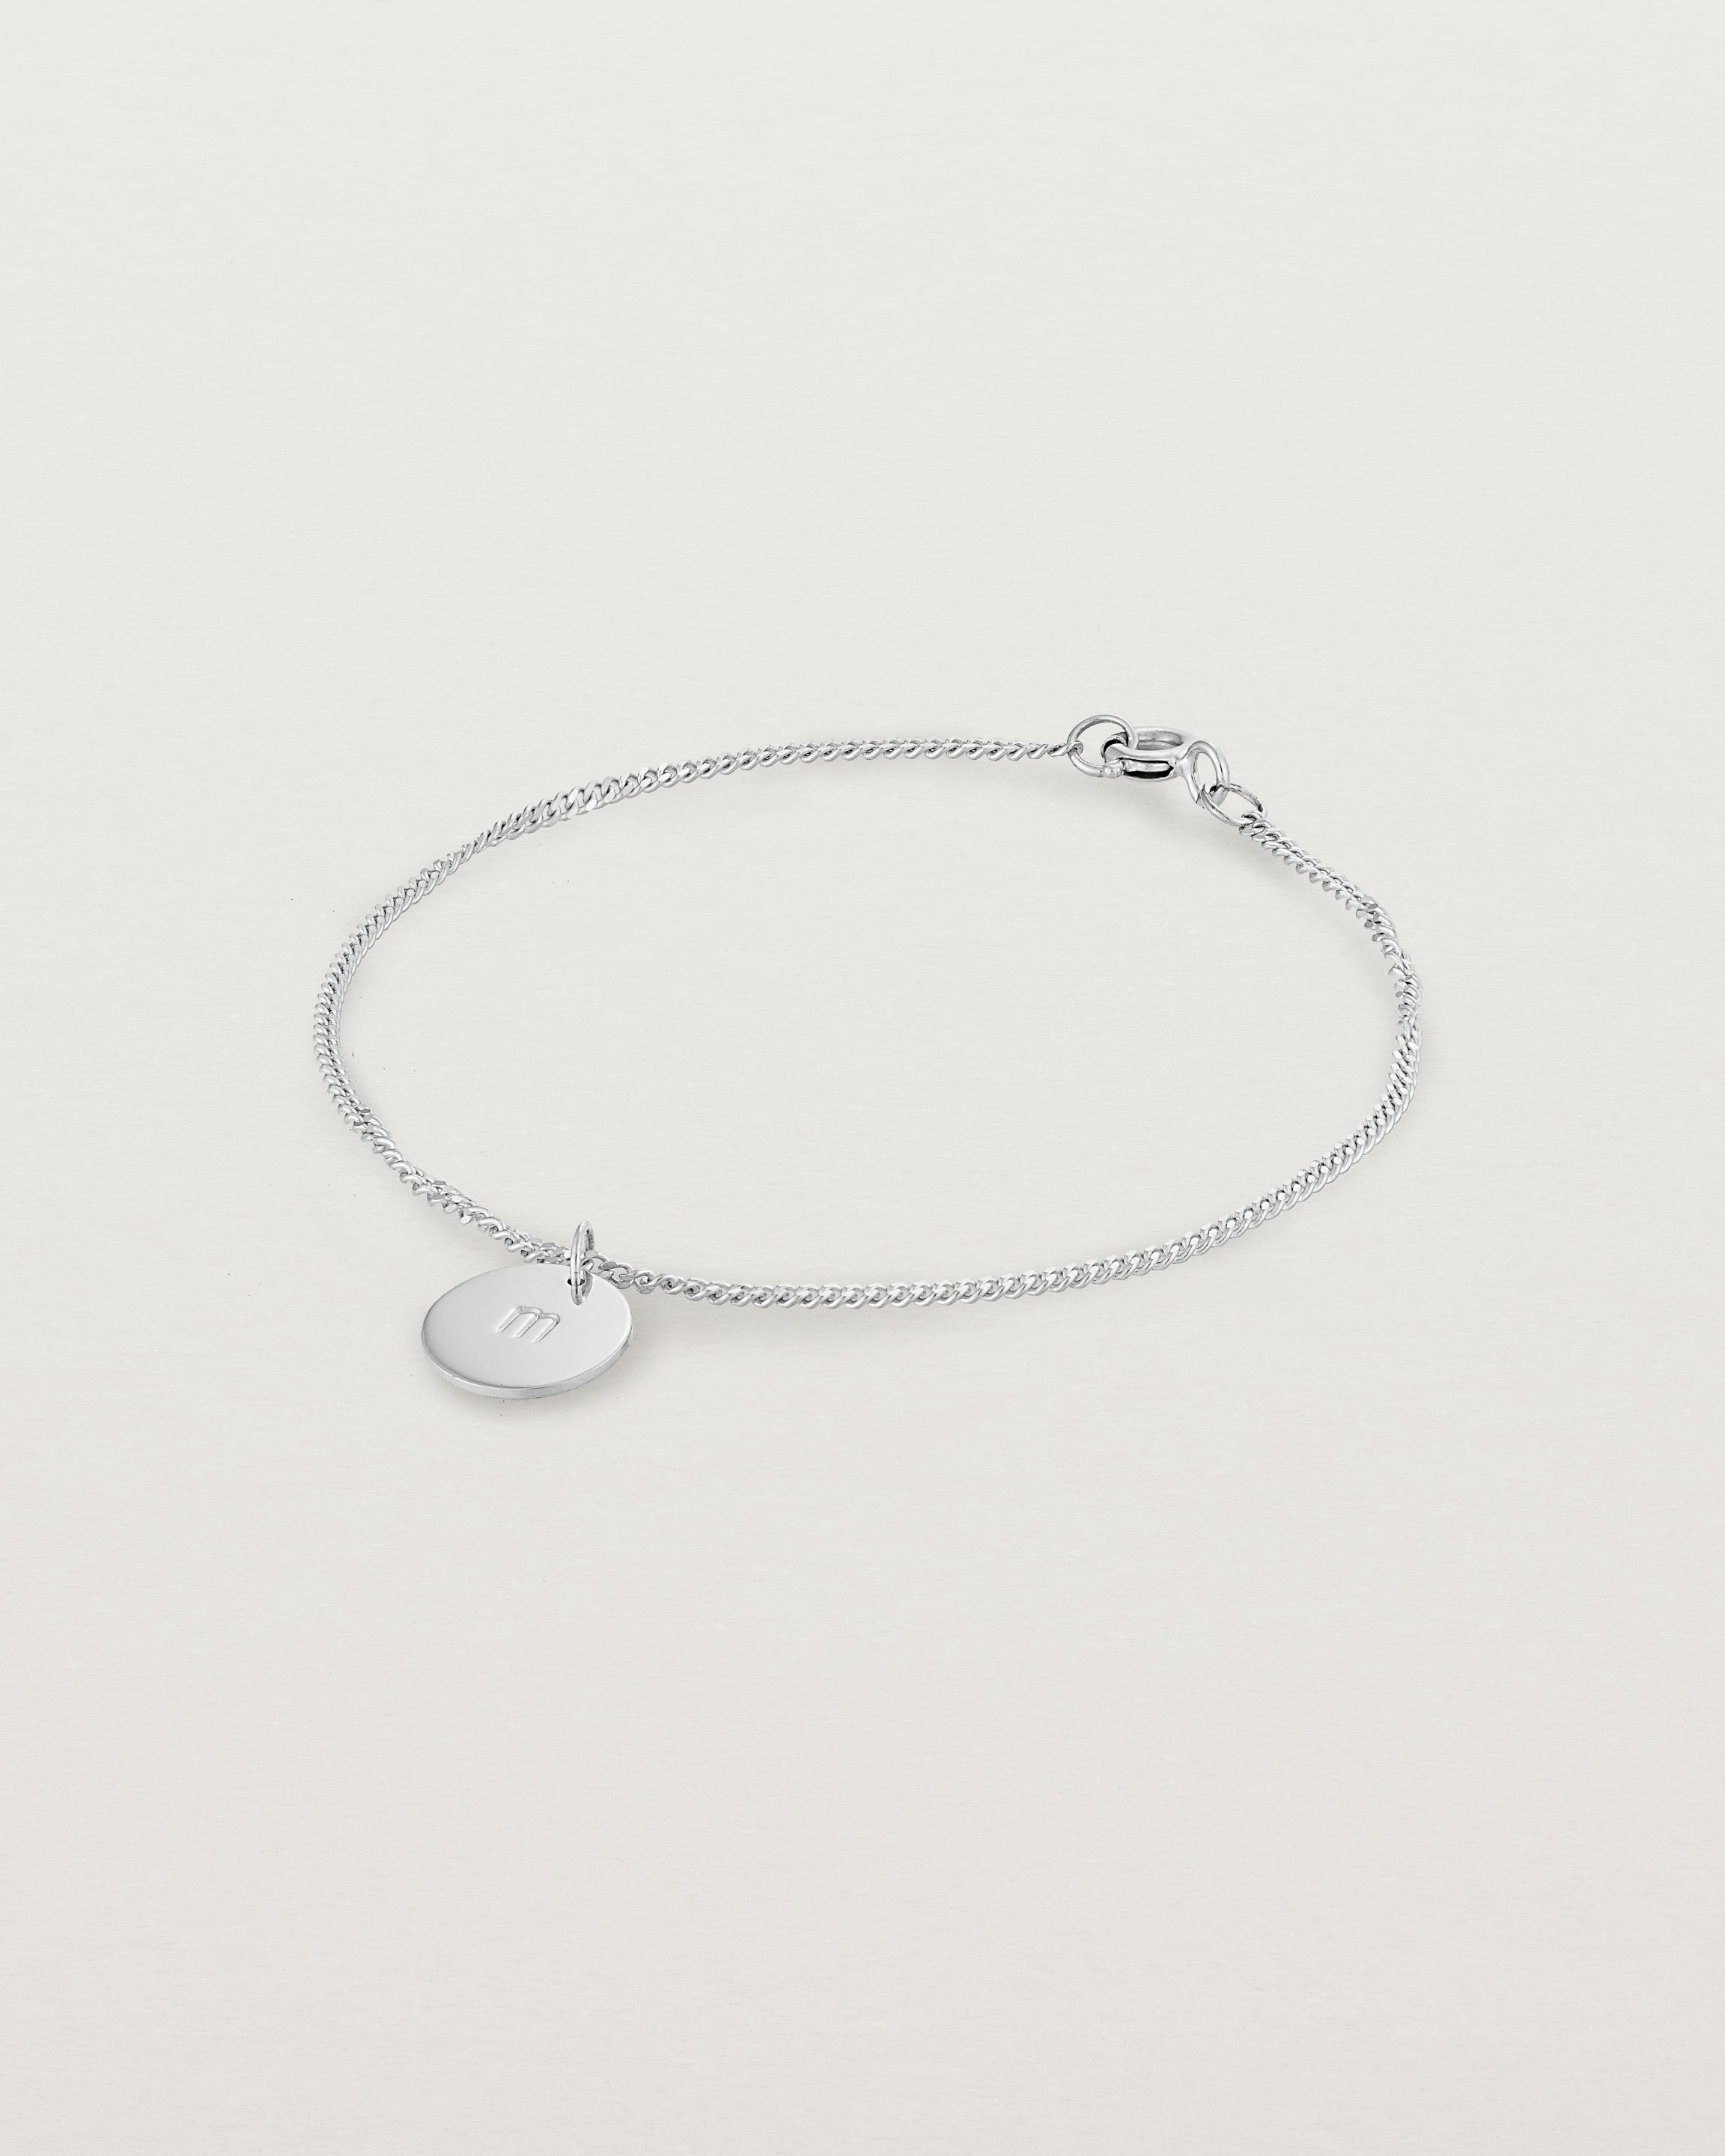 A sterling silver chain bracelet featuring a disc with an engraved letter m